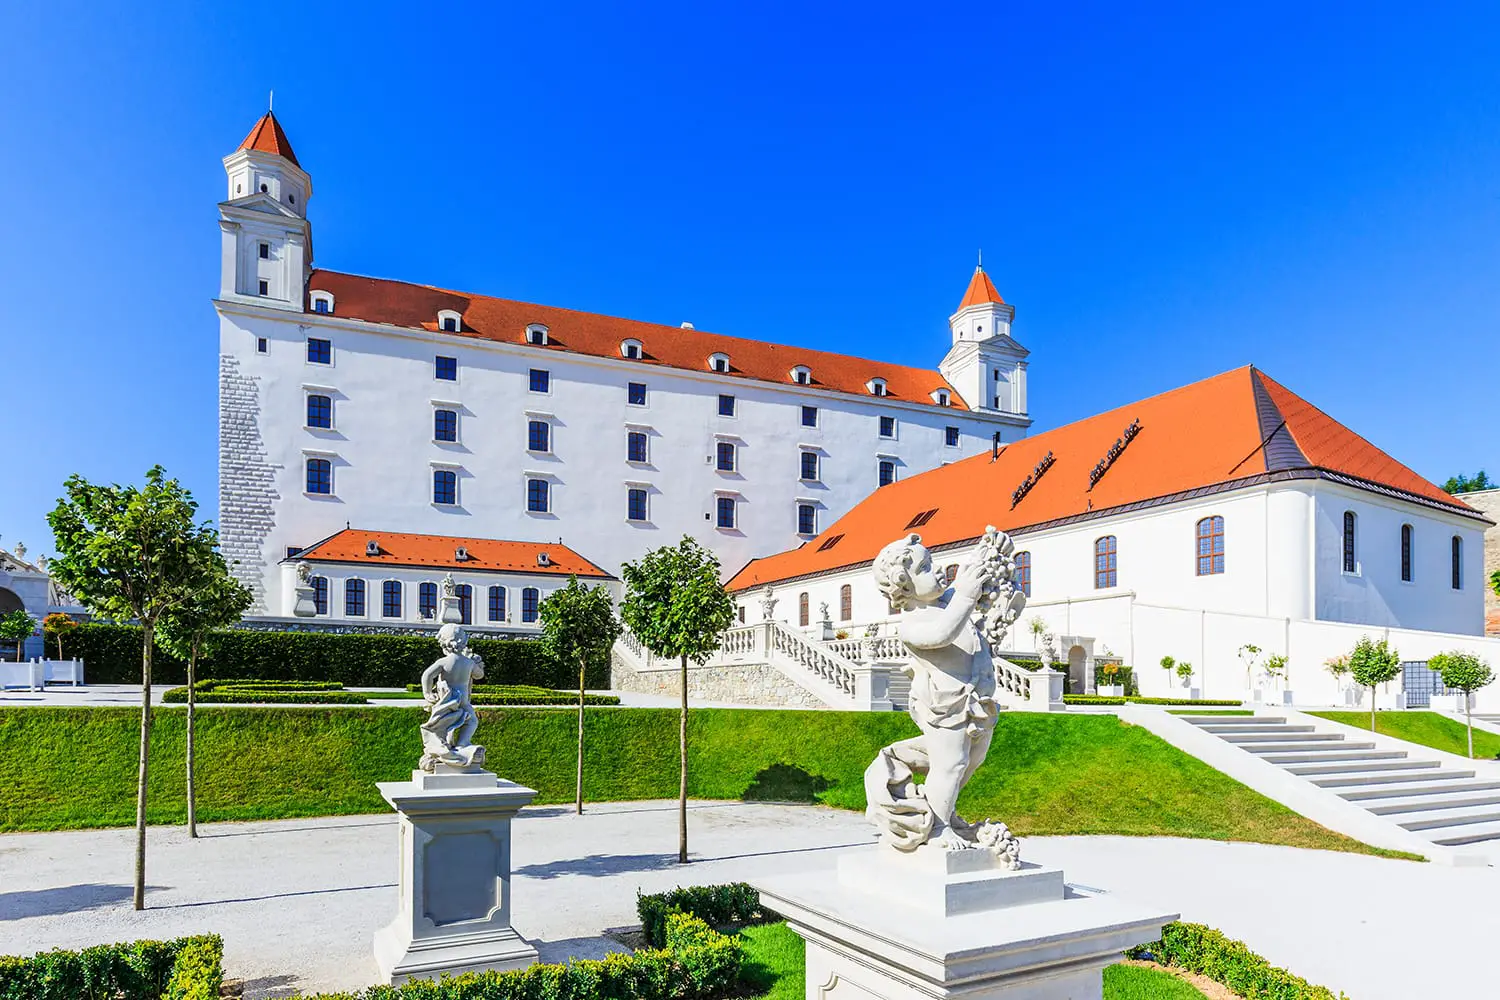 View of the Bratislava castle and its gardens.